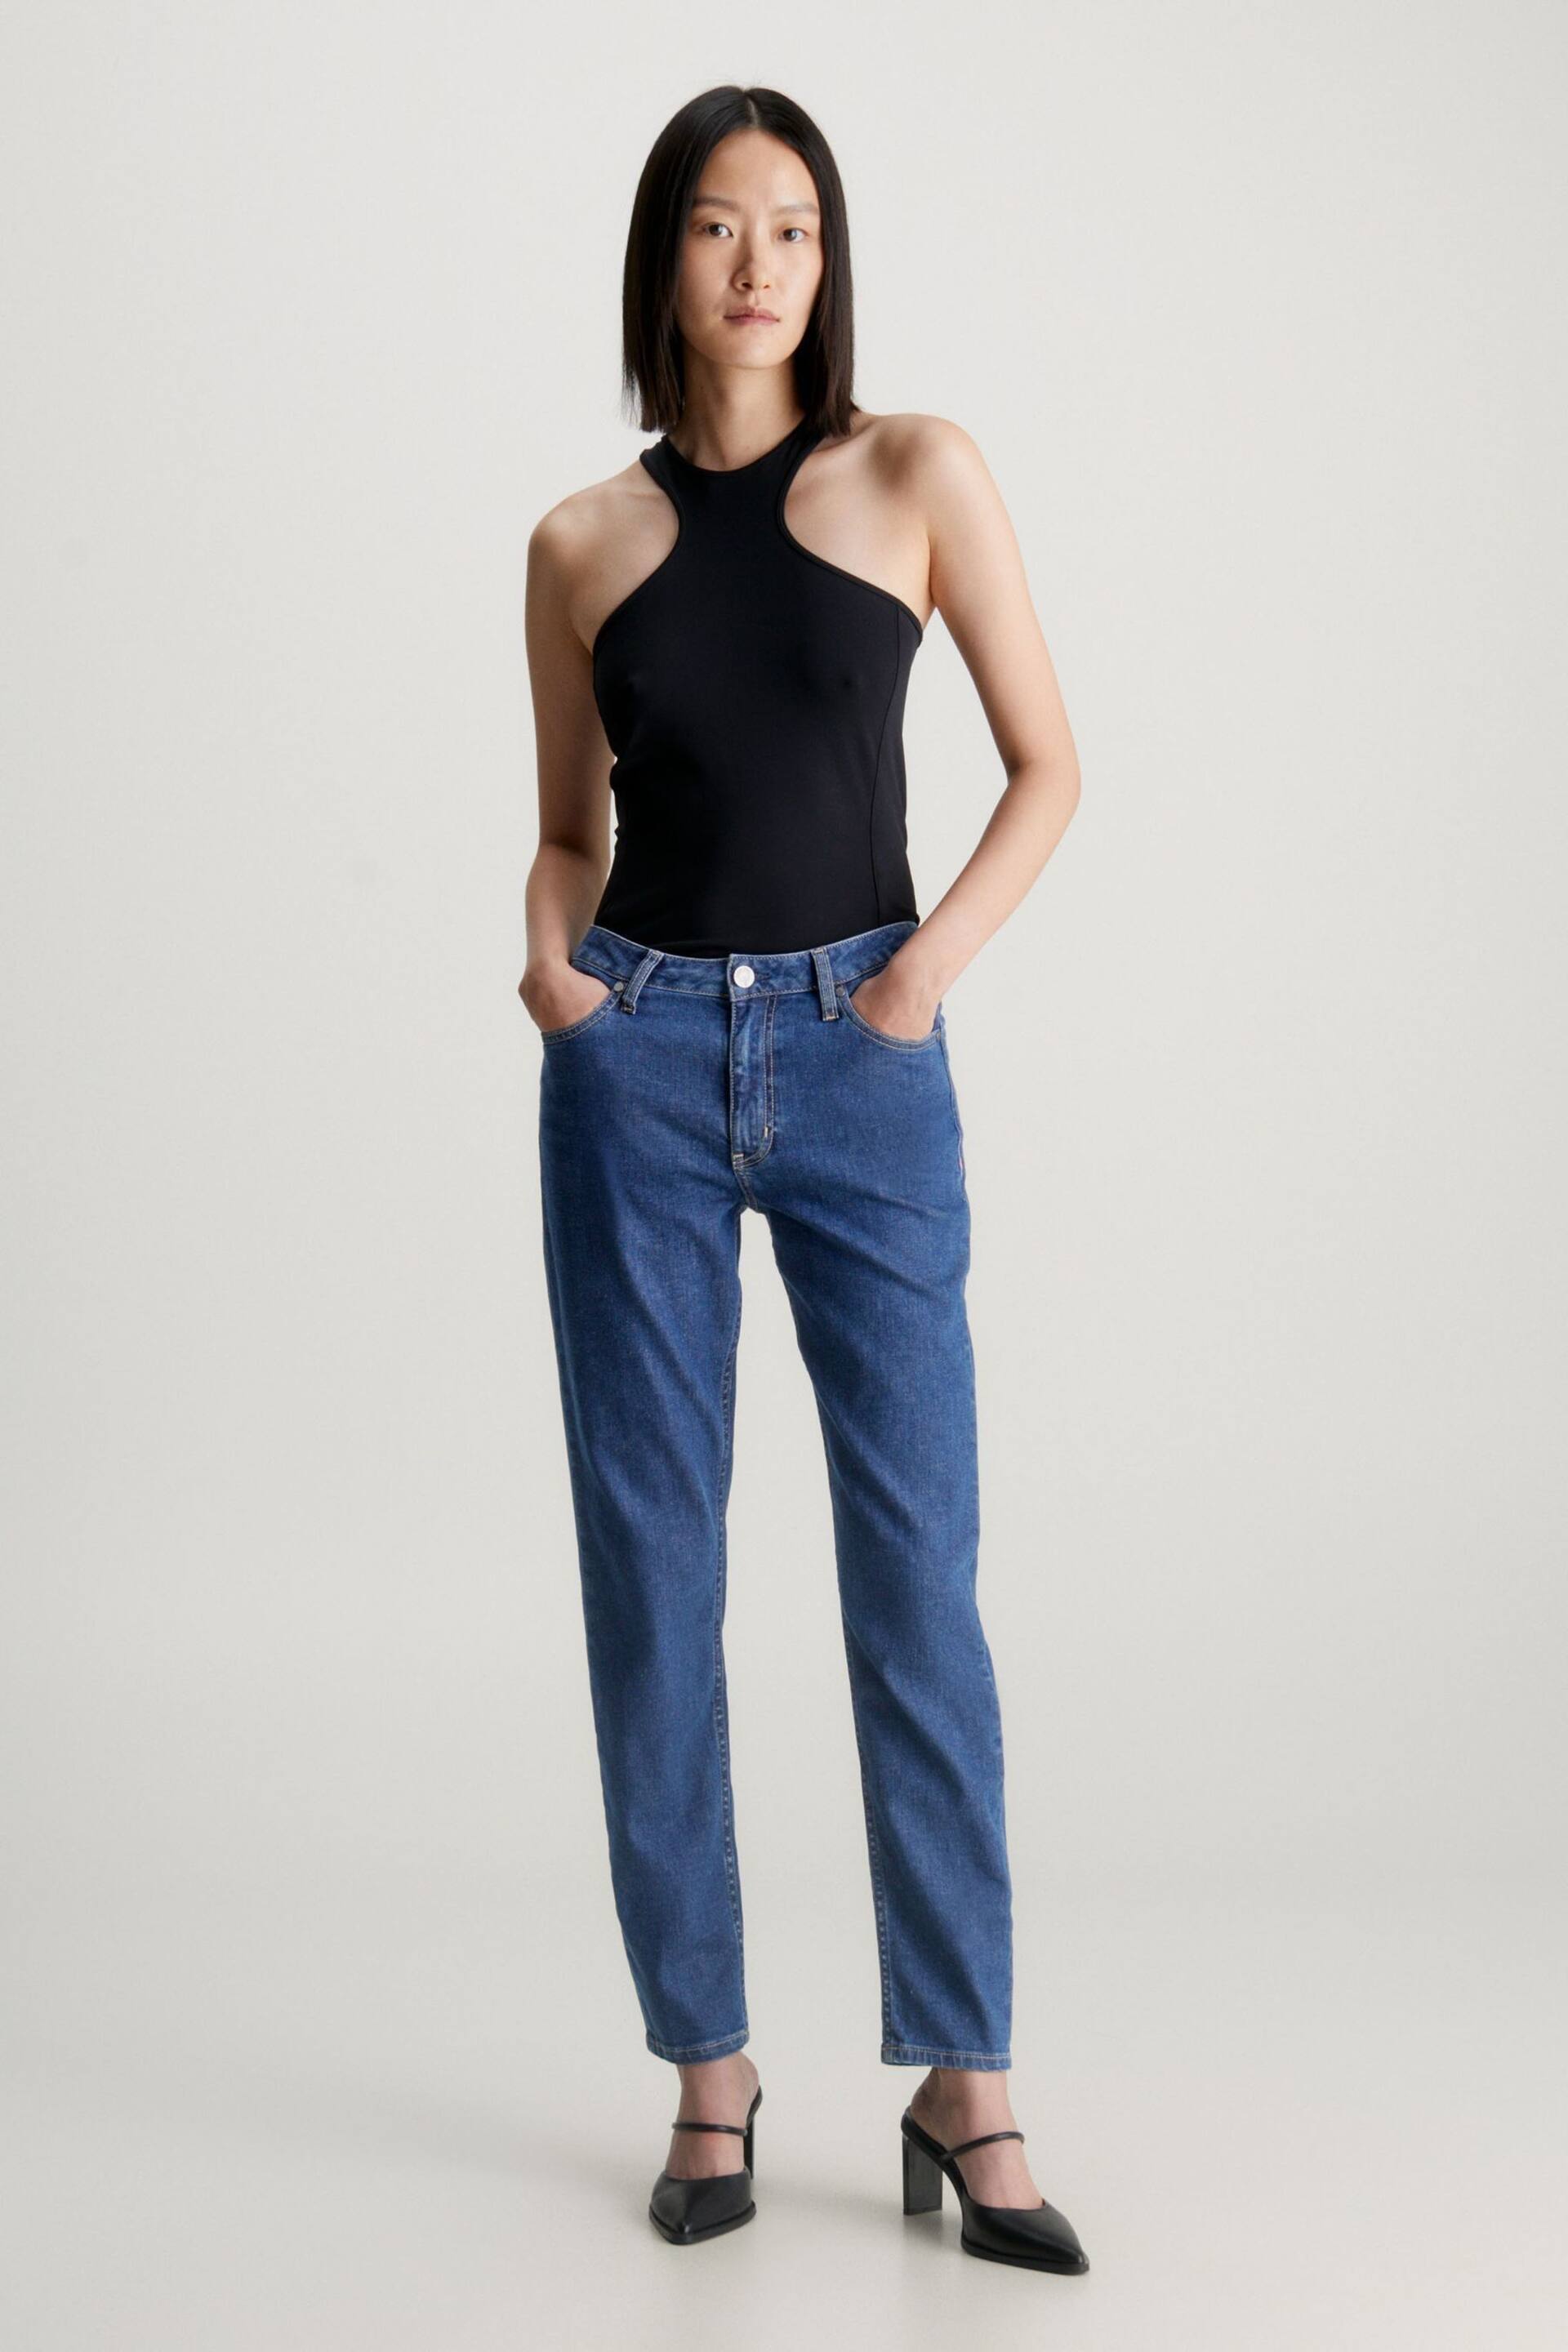 Calvin Klein Blue Slim Mid Rise Jeans - Image 3 of 5